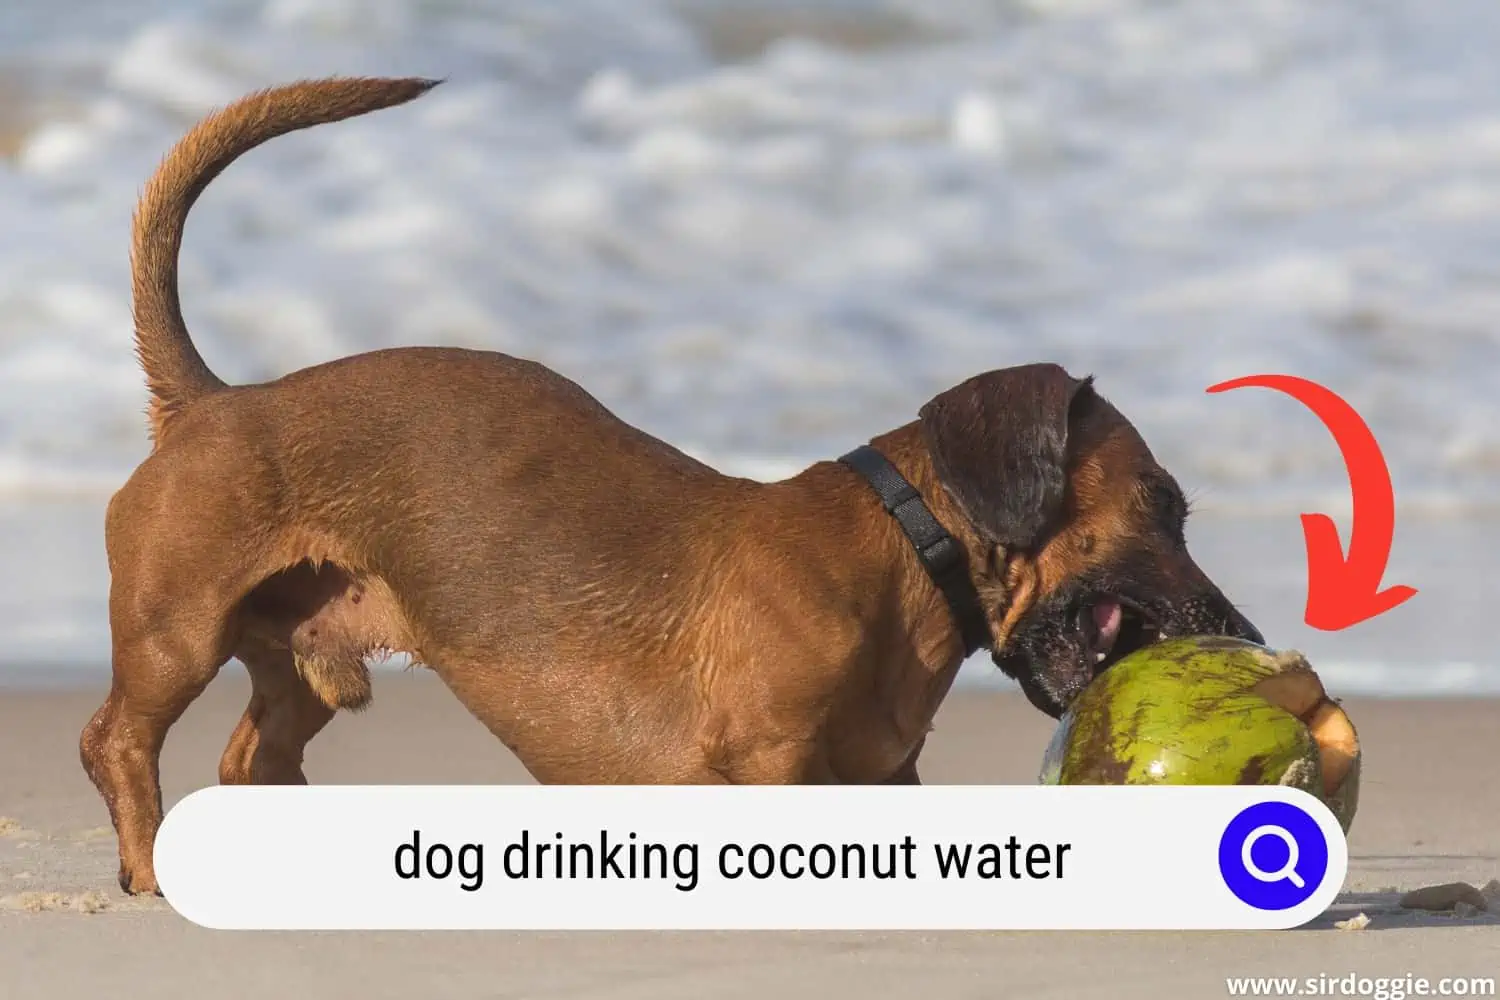 A dog trying to open coconut